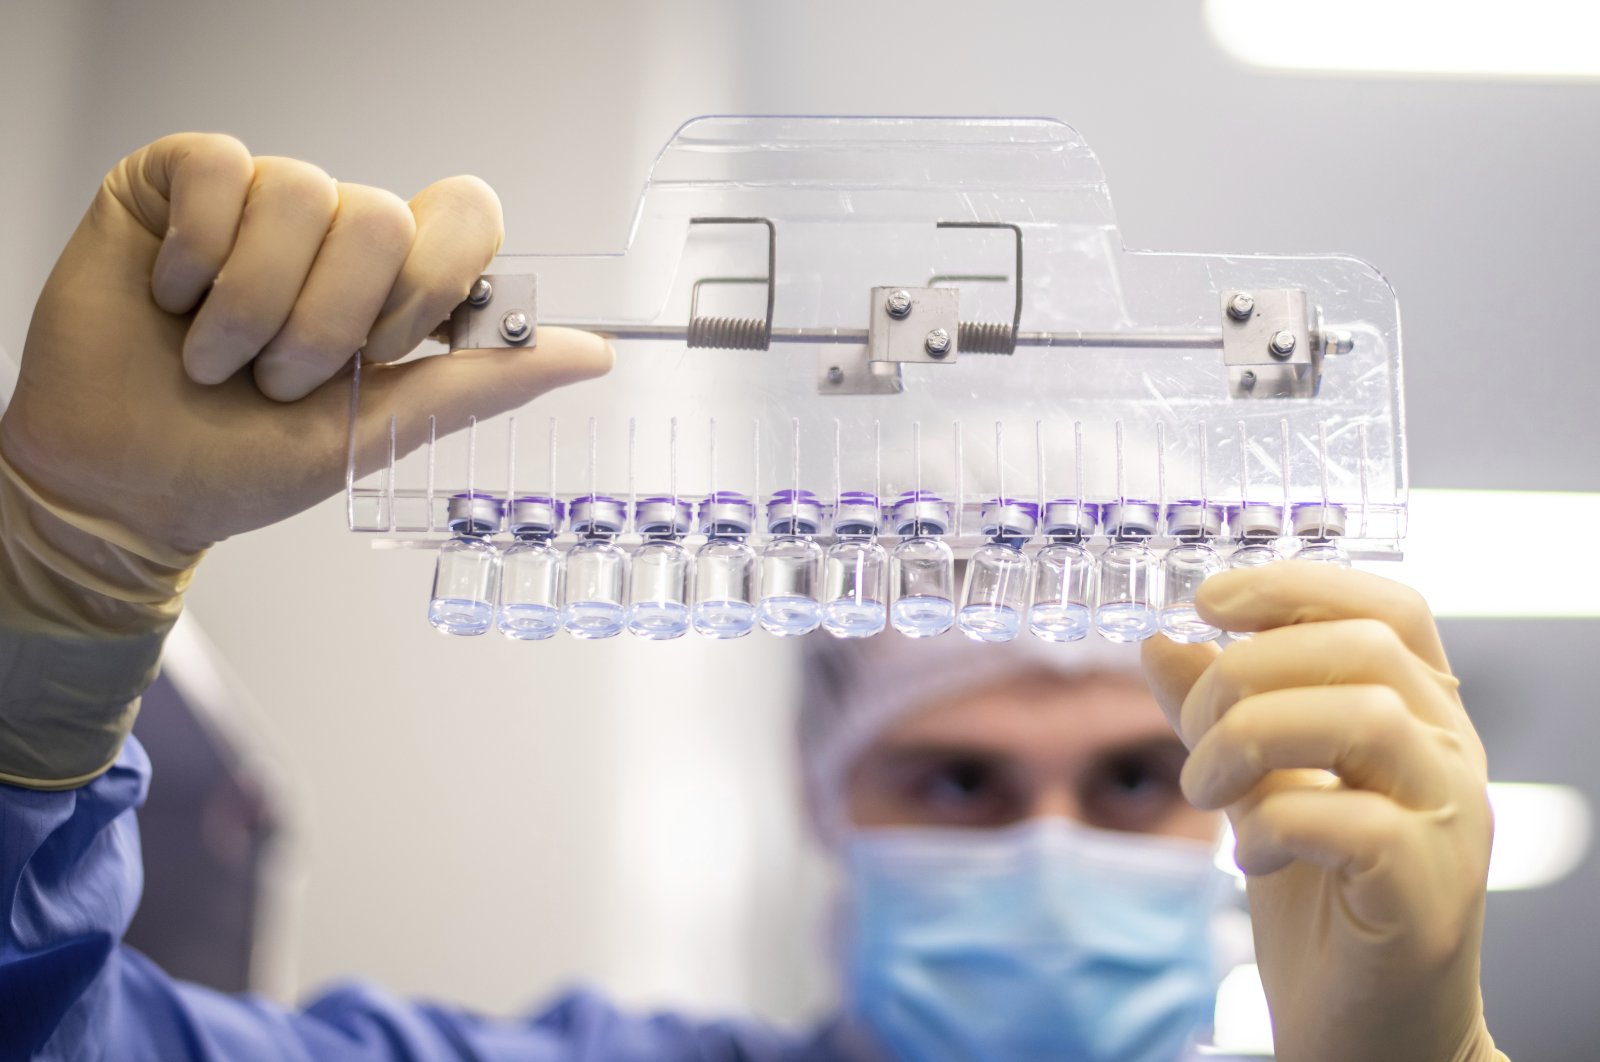 A technician inspects filled vials of the Pfizer-BioNTech COVID-19 vaccine at the company's facility in Puurs, Belgium, March, 2021. (Pfizer via AP)